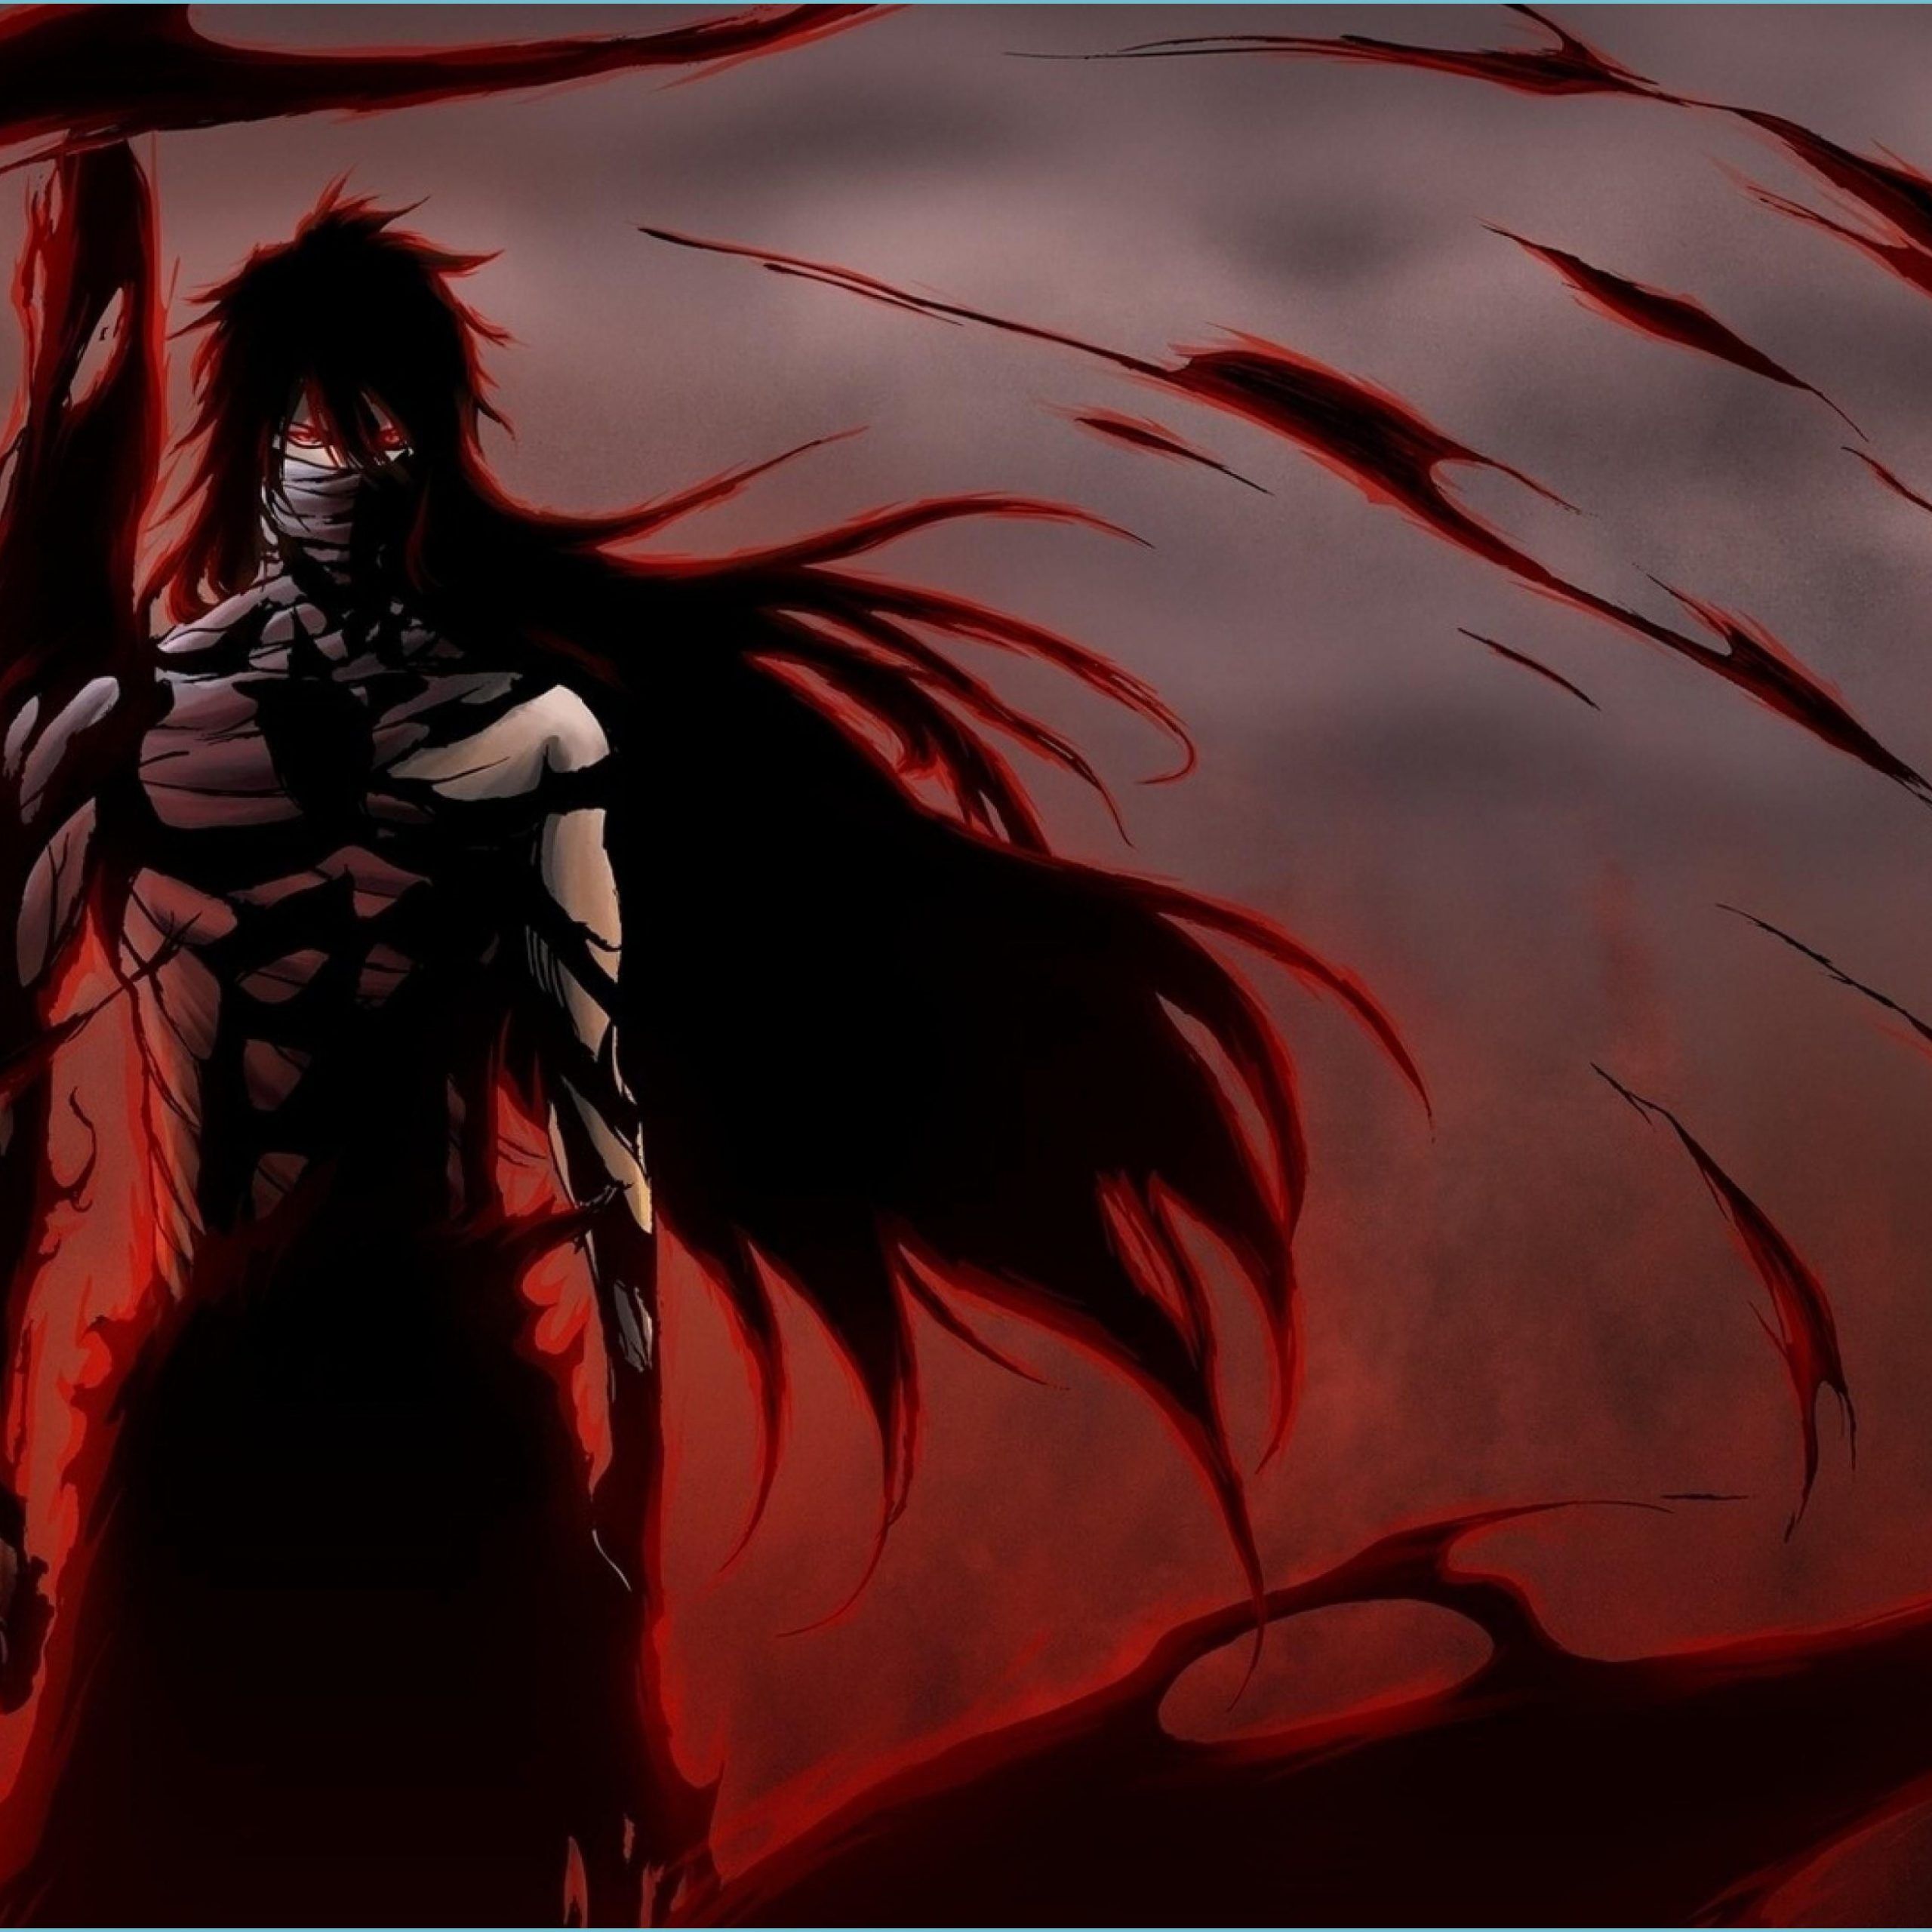 Black and Red Anime Wallpaper Free Black and Red Anime anime wallpaper